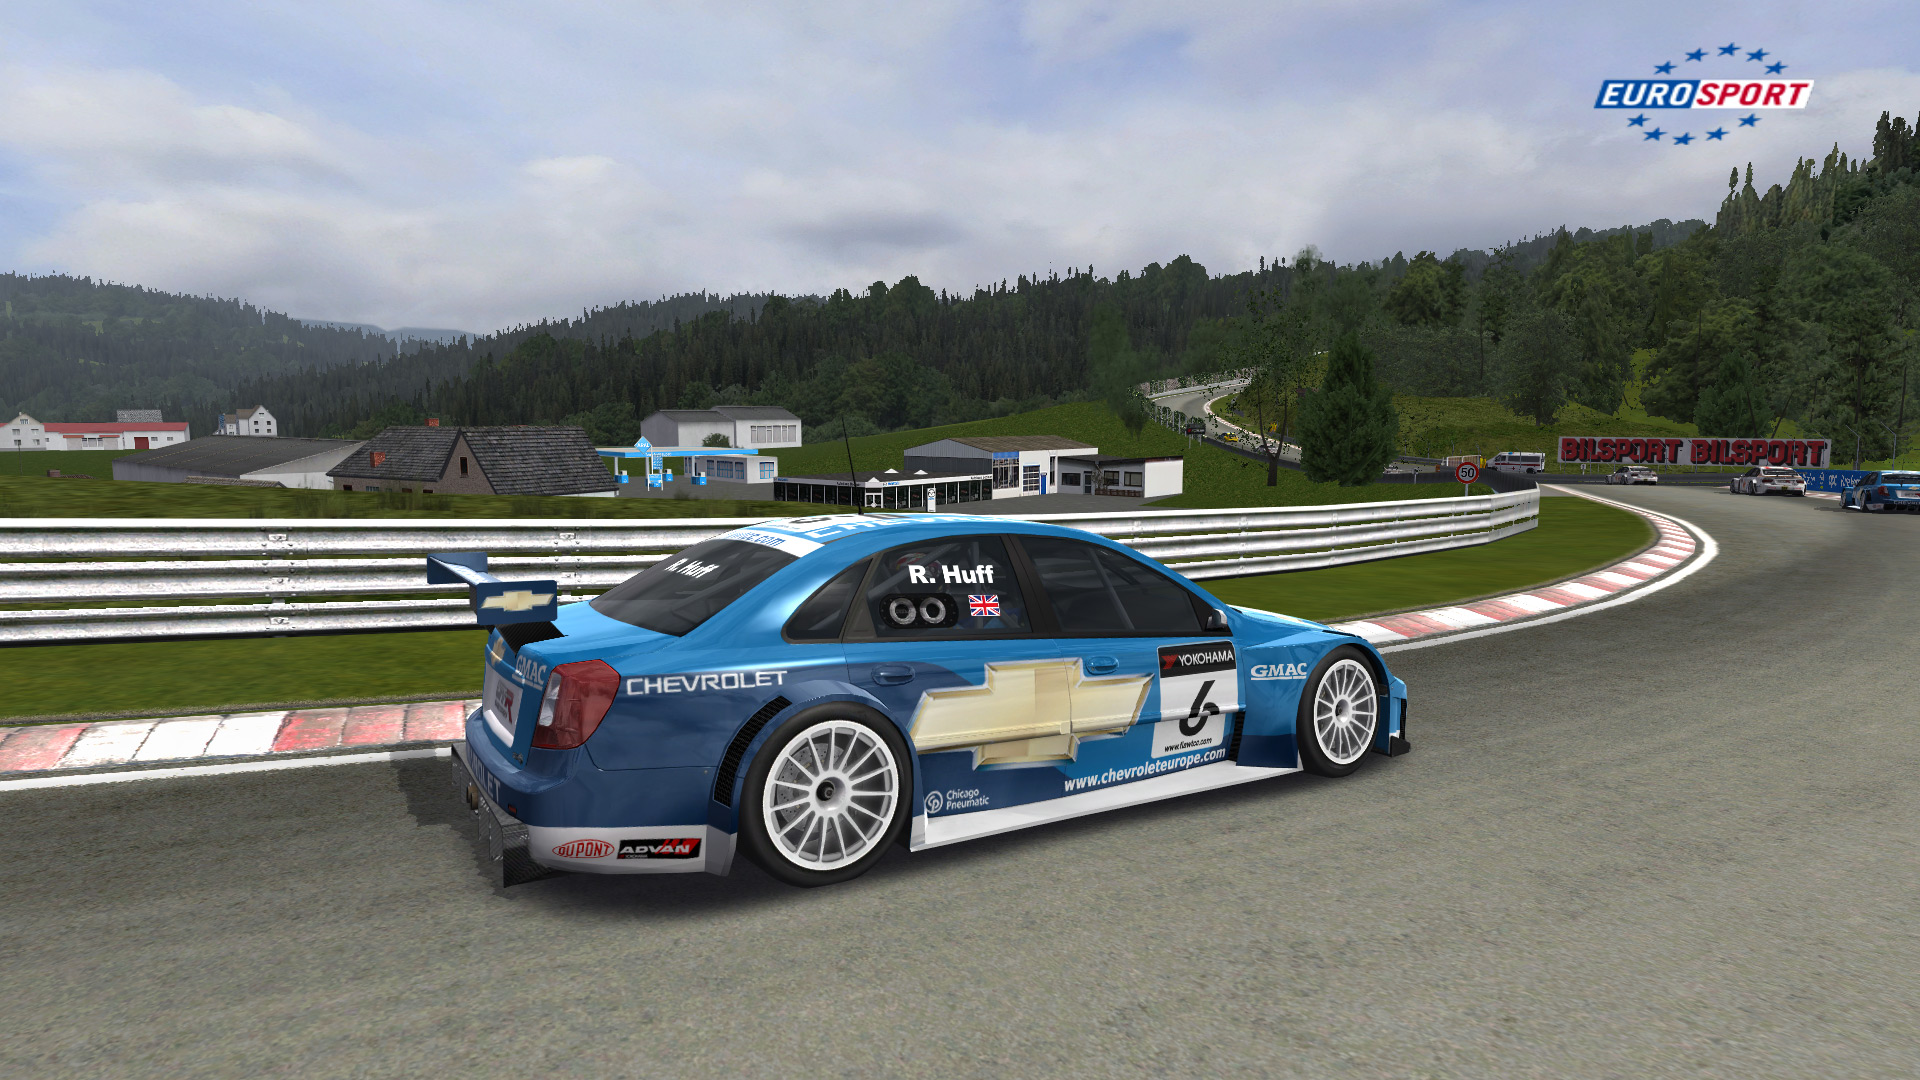 Race07-Graphic-and-Shaders-Playground-Nordschleife-Clouds1.jpg